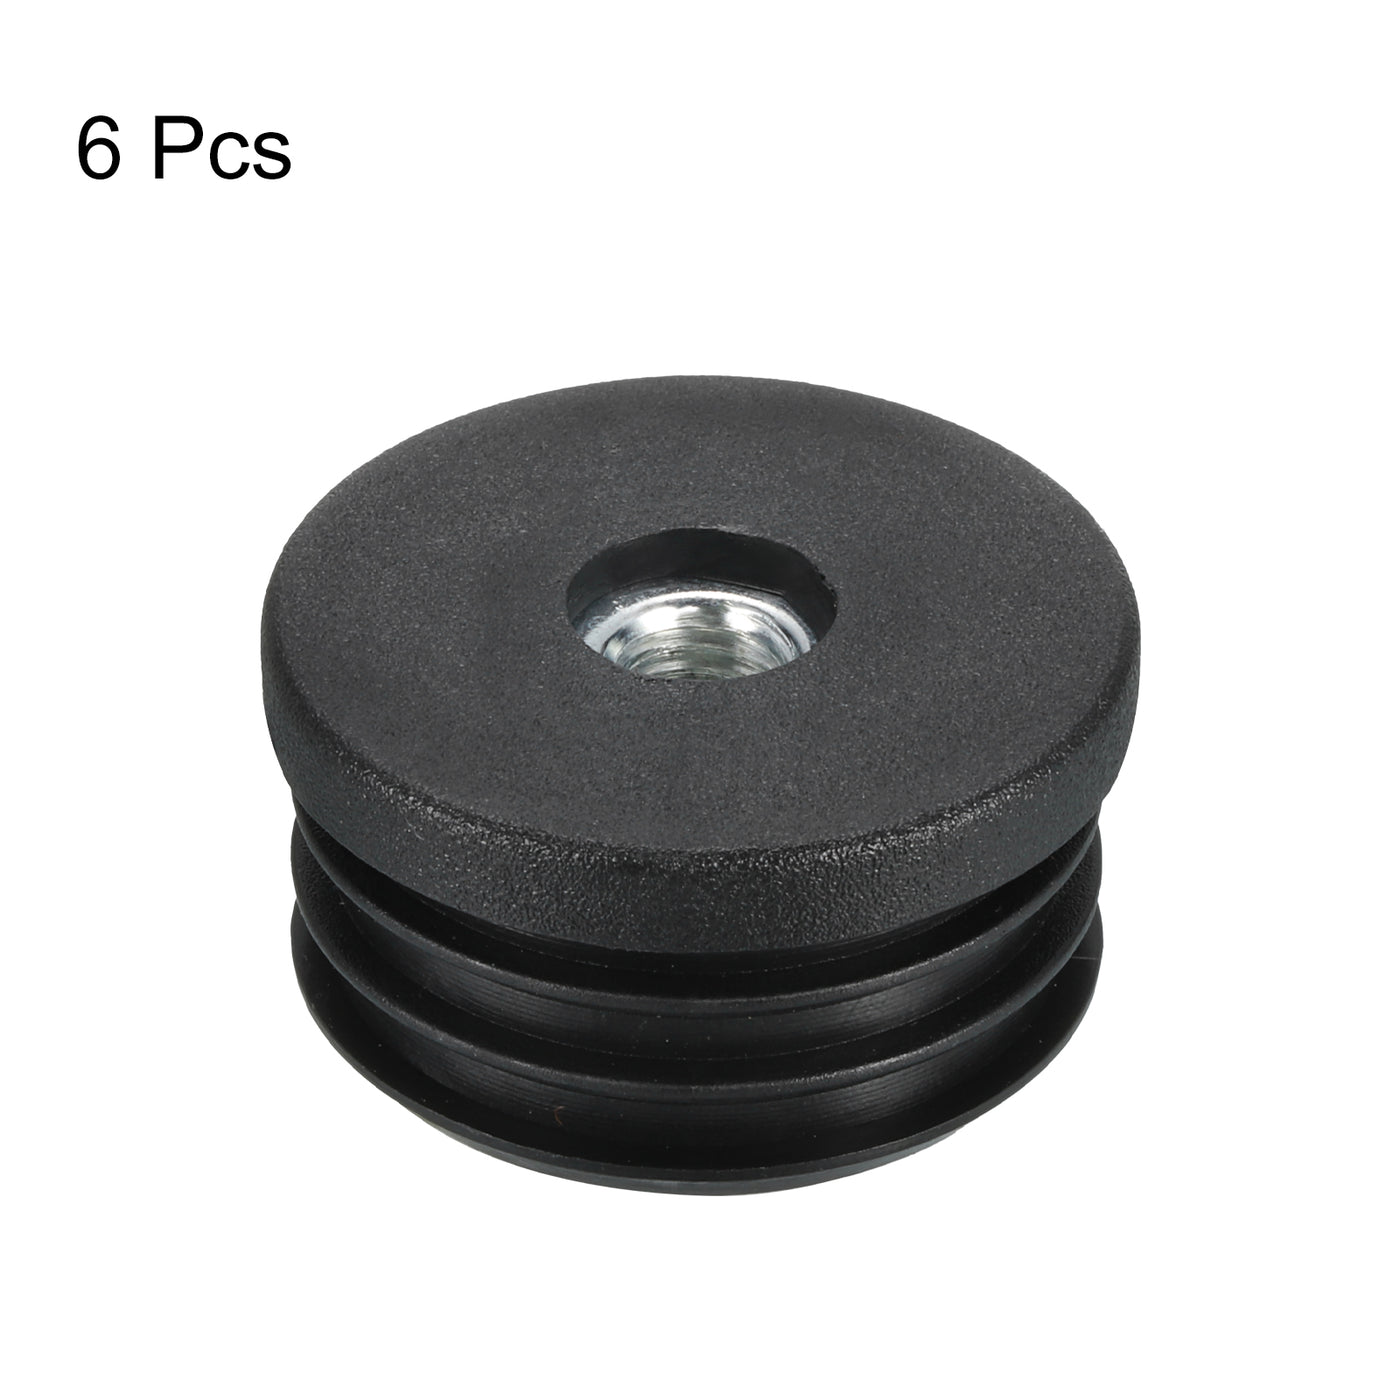 uxcell Uxcell 6Pcs Caster Insert with Thread, 38mm/1.5" M8 Thread for Furniture